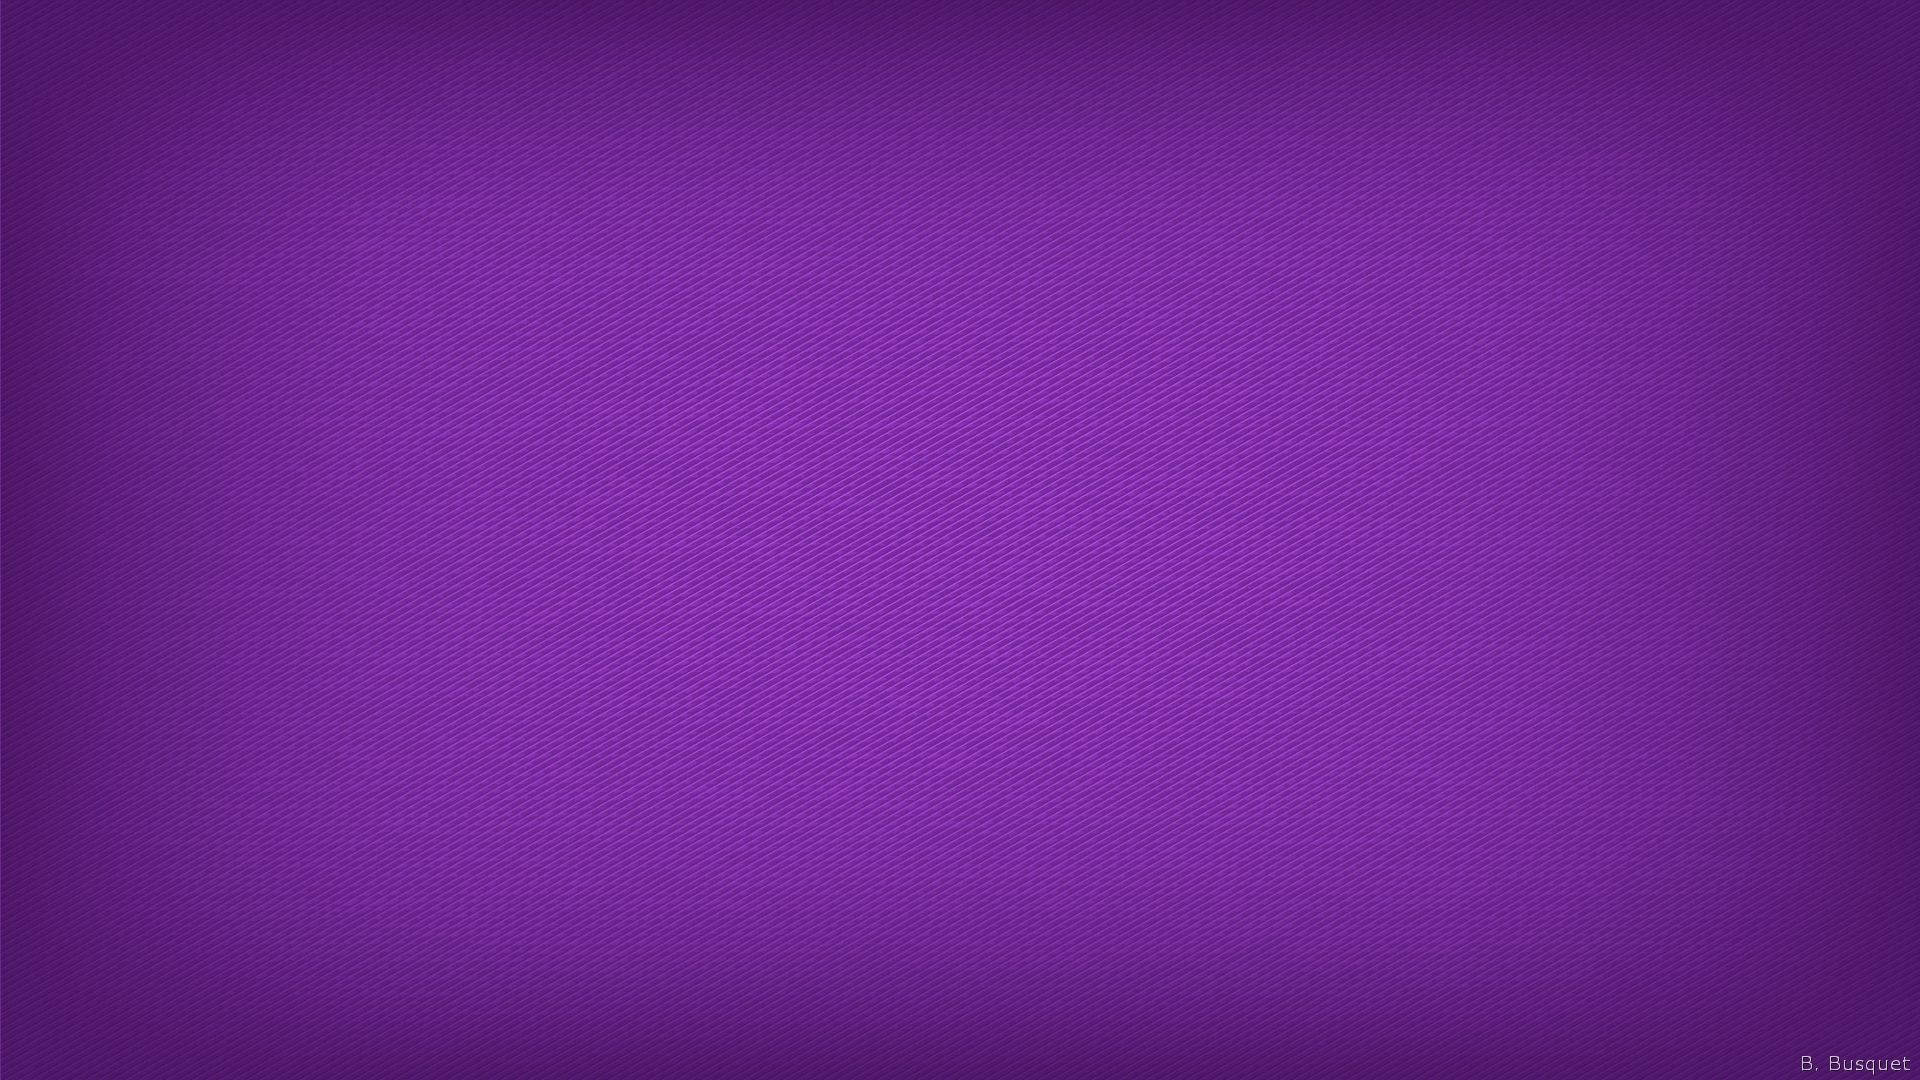 Iridescent shades of purple on a simple background Wallpaper